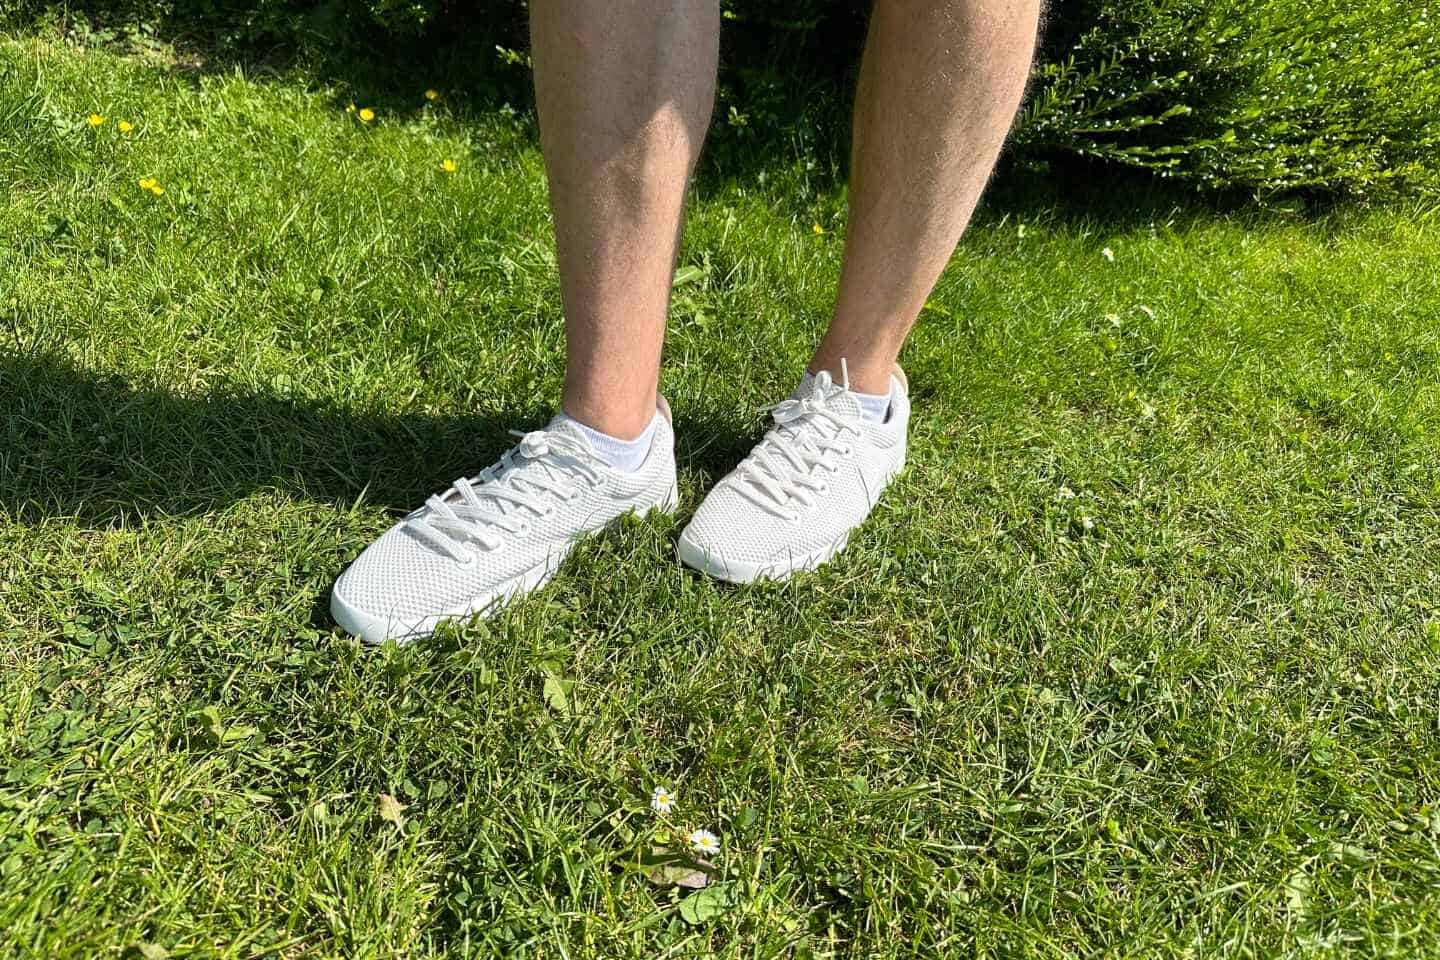 Tom wearing Allbirds Tree Pipers shoes standing on the grass